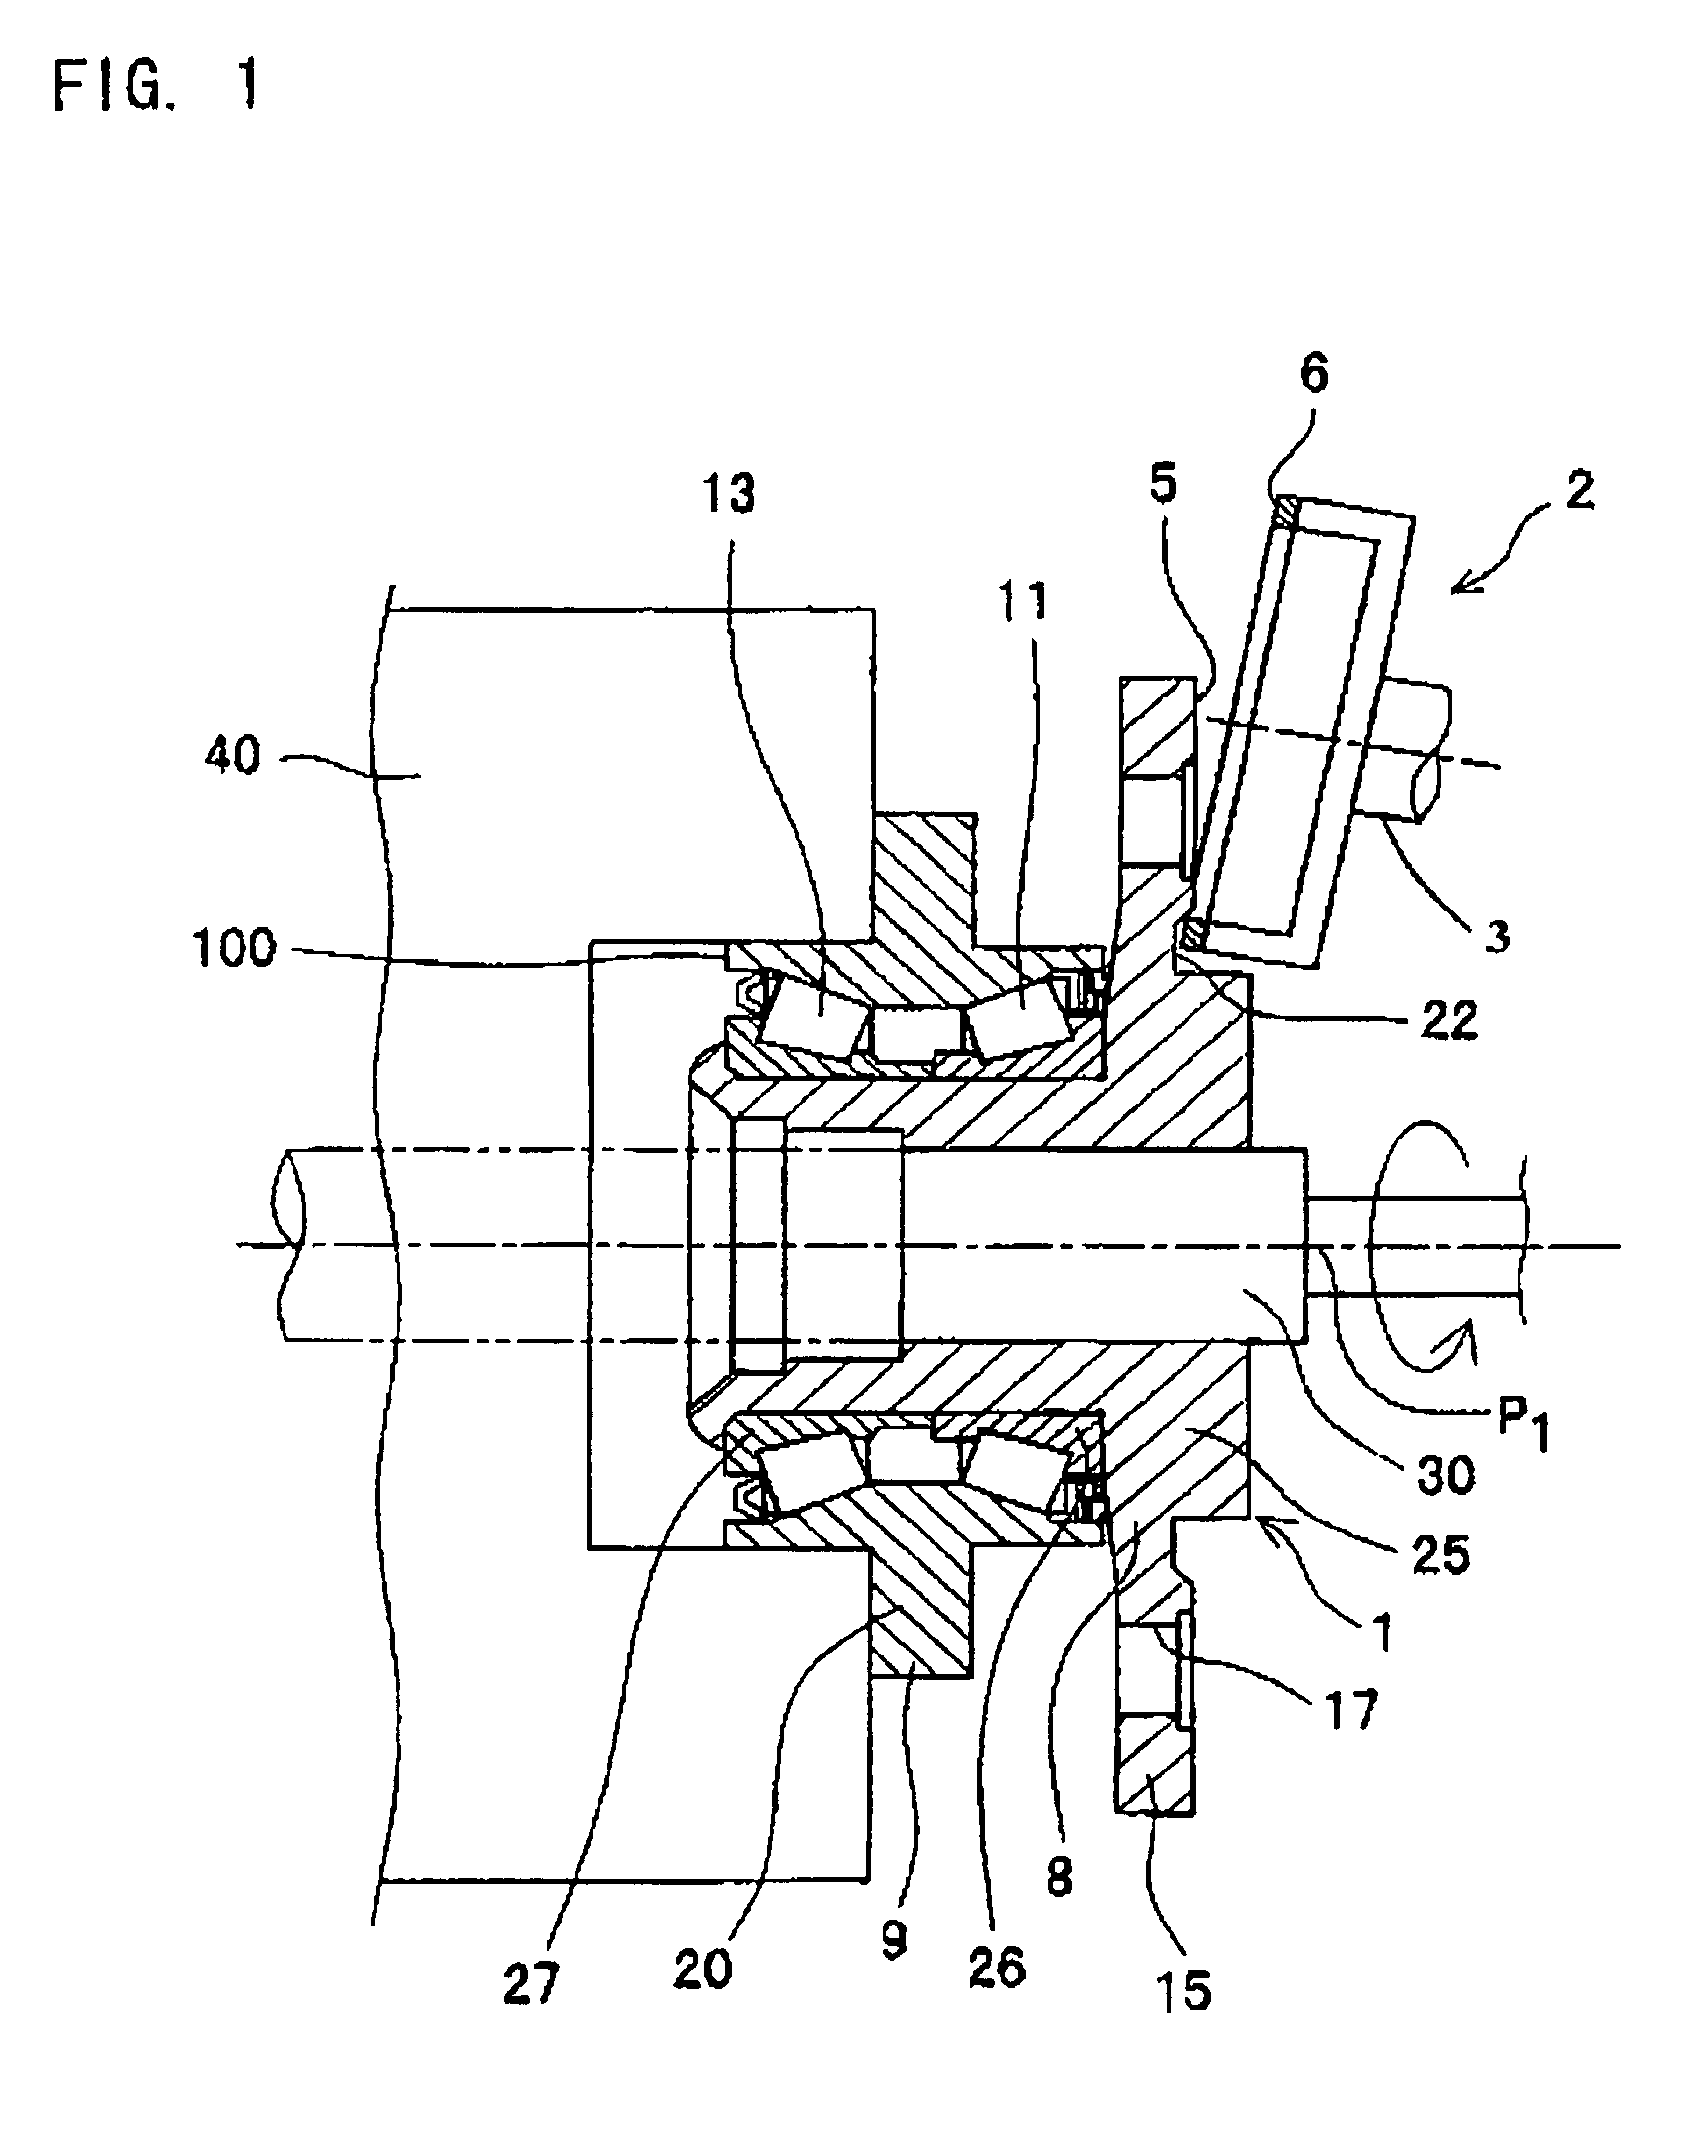 Method of grinding a brake disk mounting surface with an annular recess using an inclined grinding wheel